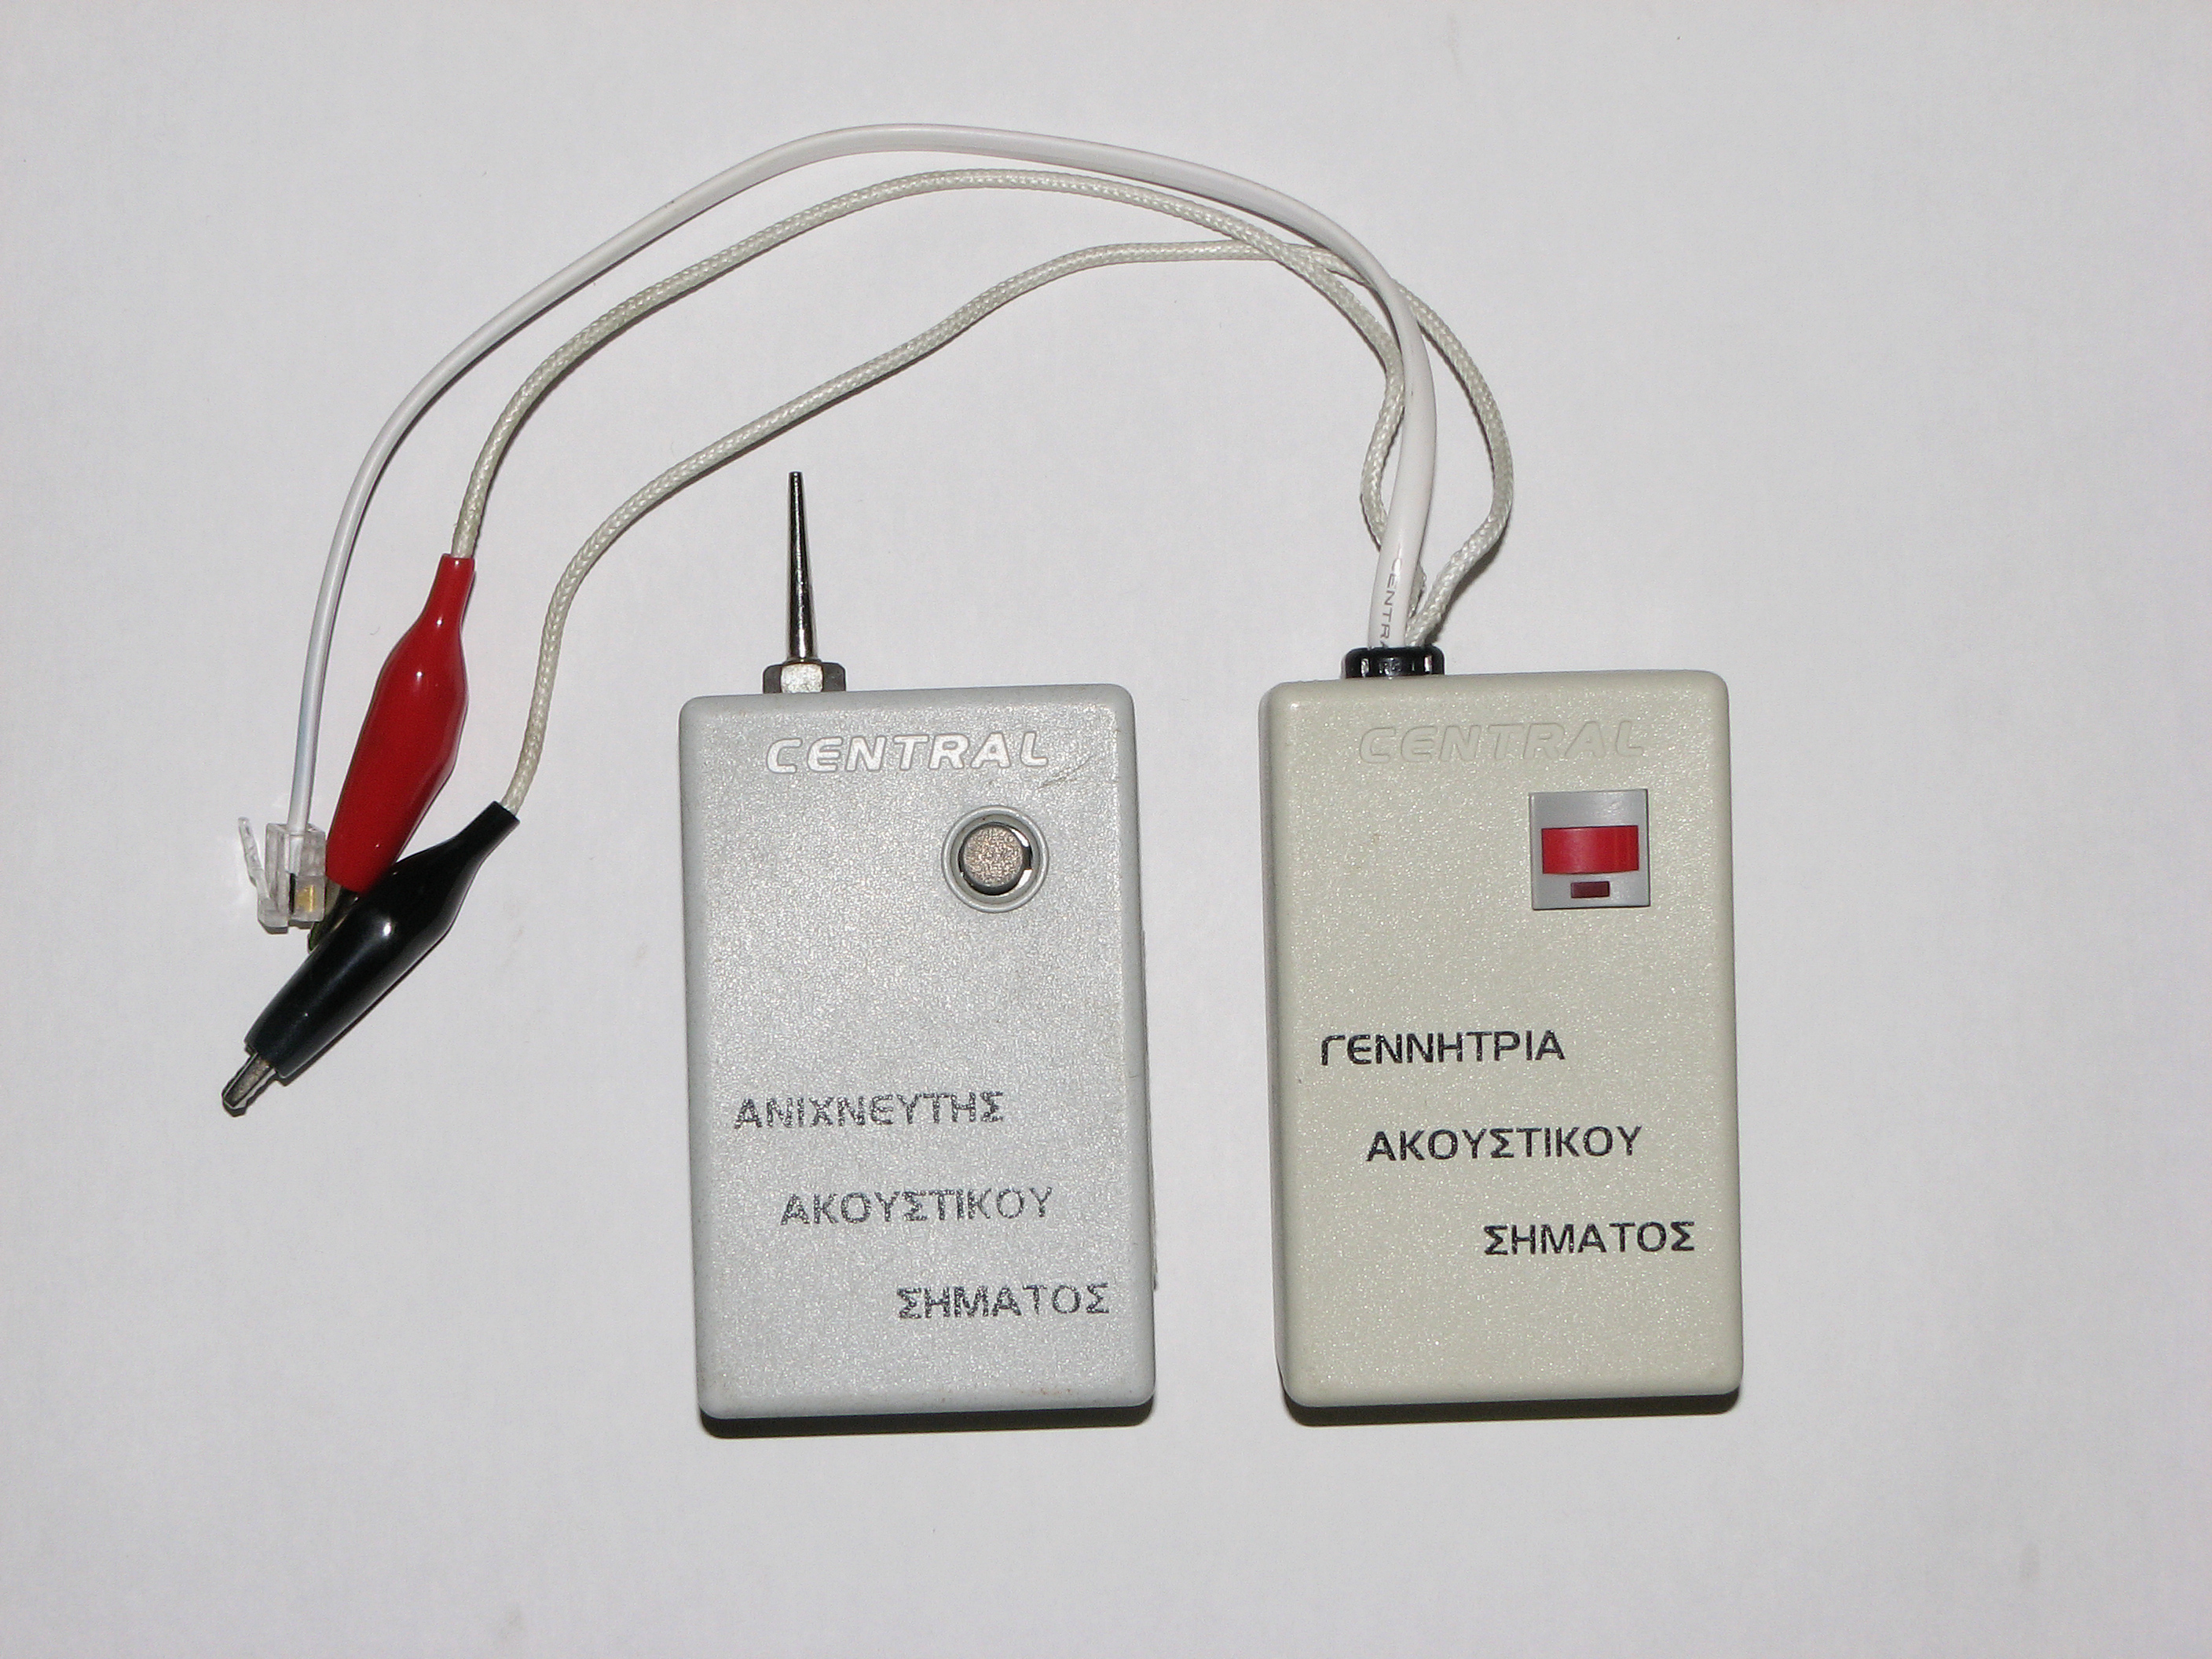 Tone-generator-and-wire-tracker-0a